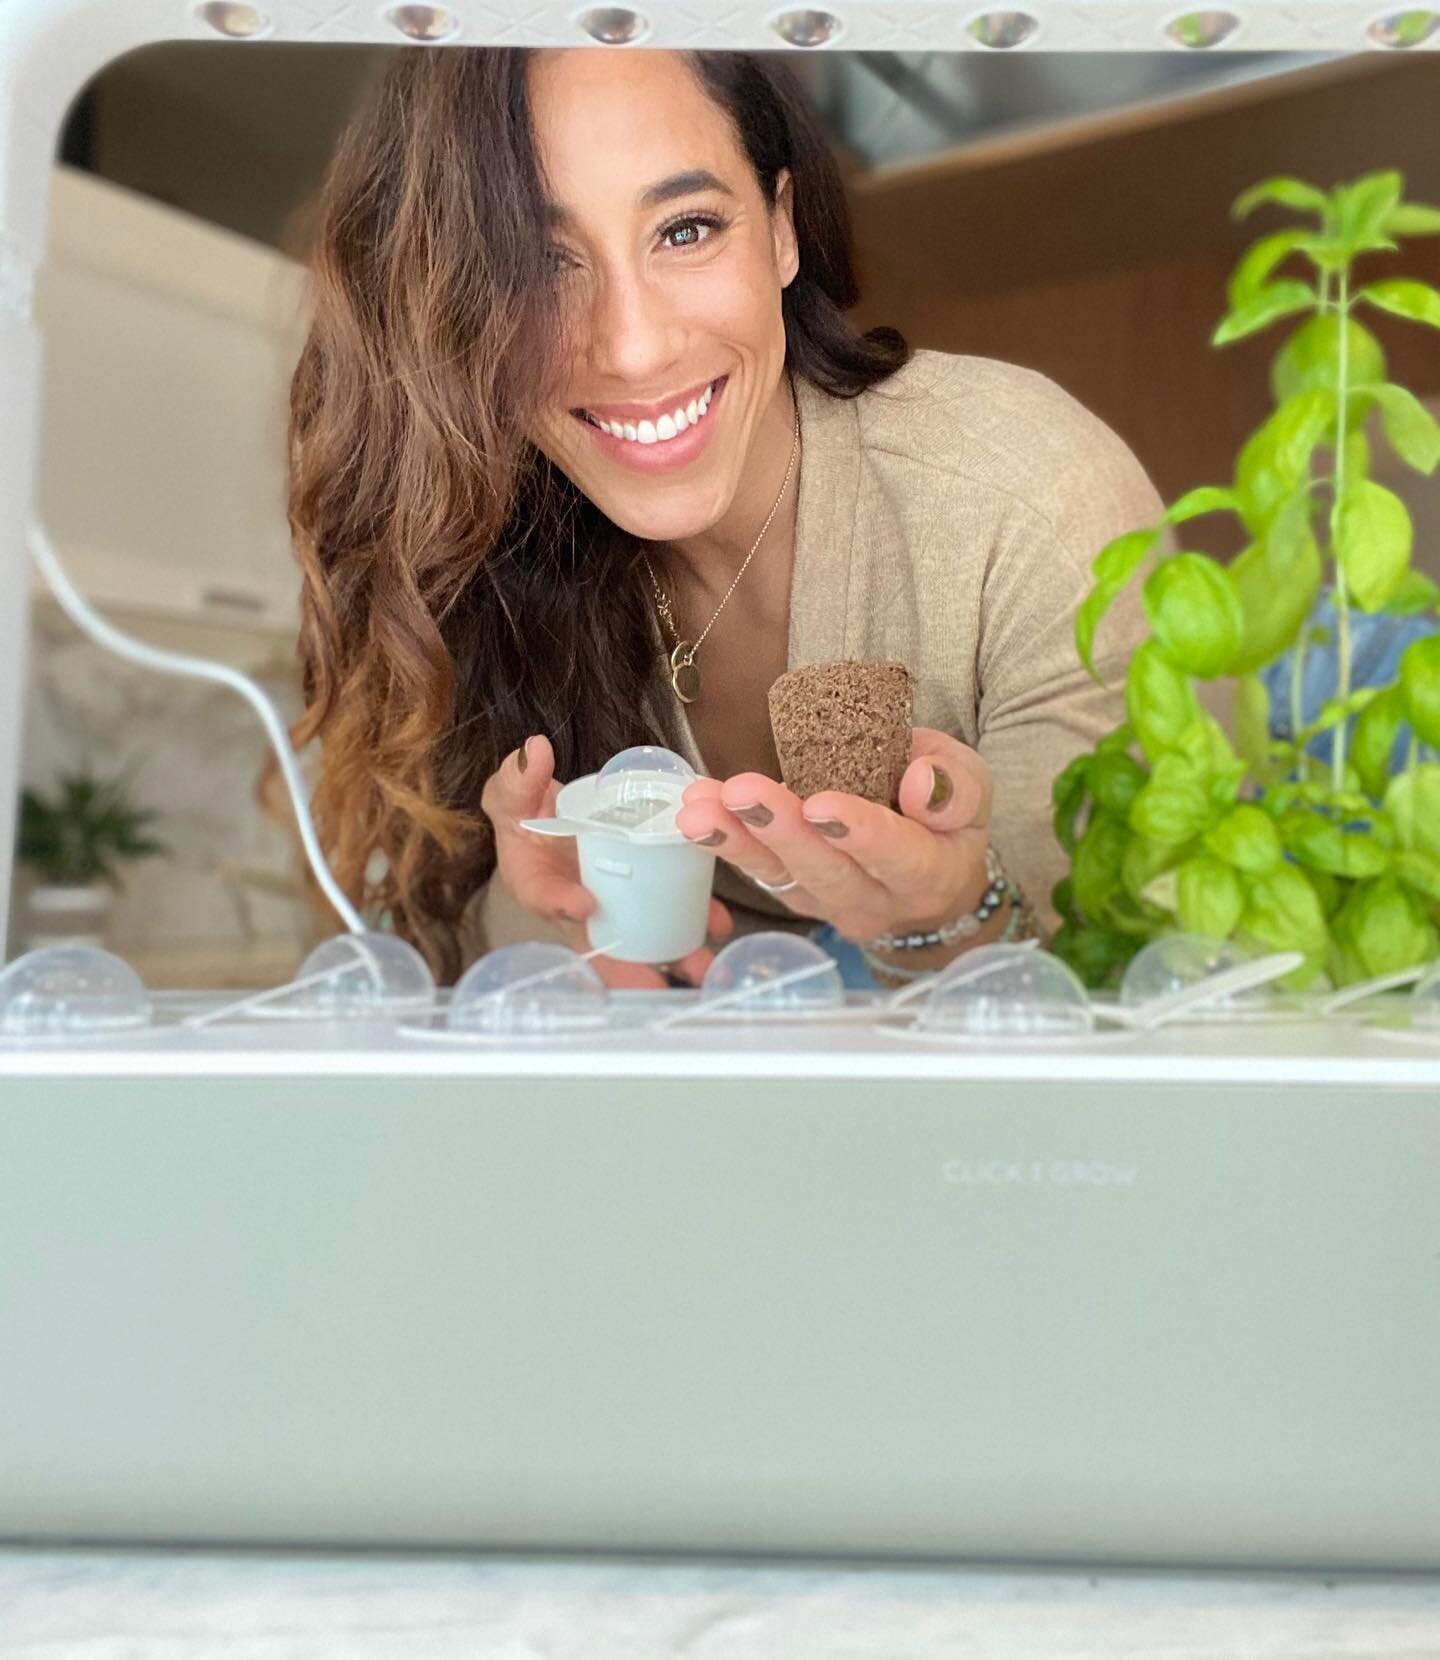 New flash! Hydroponics aren&rsquo;t just for growing weed! 
Fun fact: 
Did you know the same methods used to grow weed can be used to grow nutritious fruits and veggies right on your counter top?? 
Growing our own food at home has never been easier.
